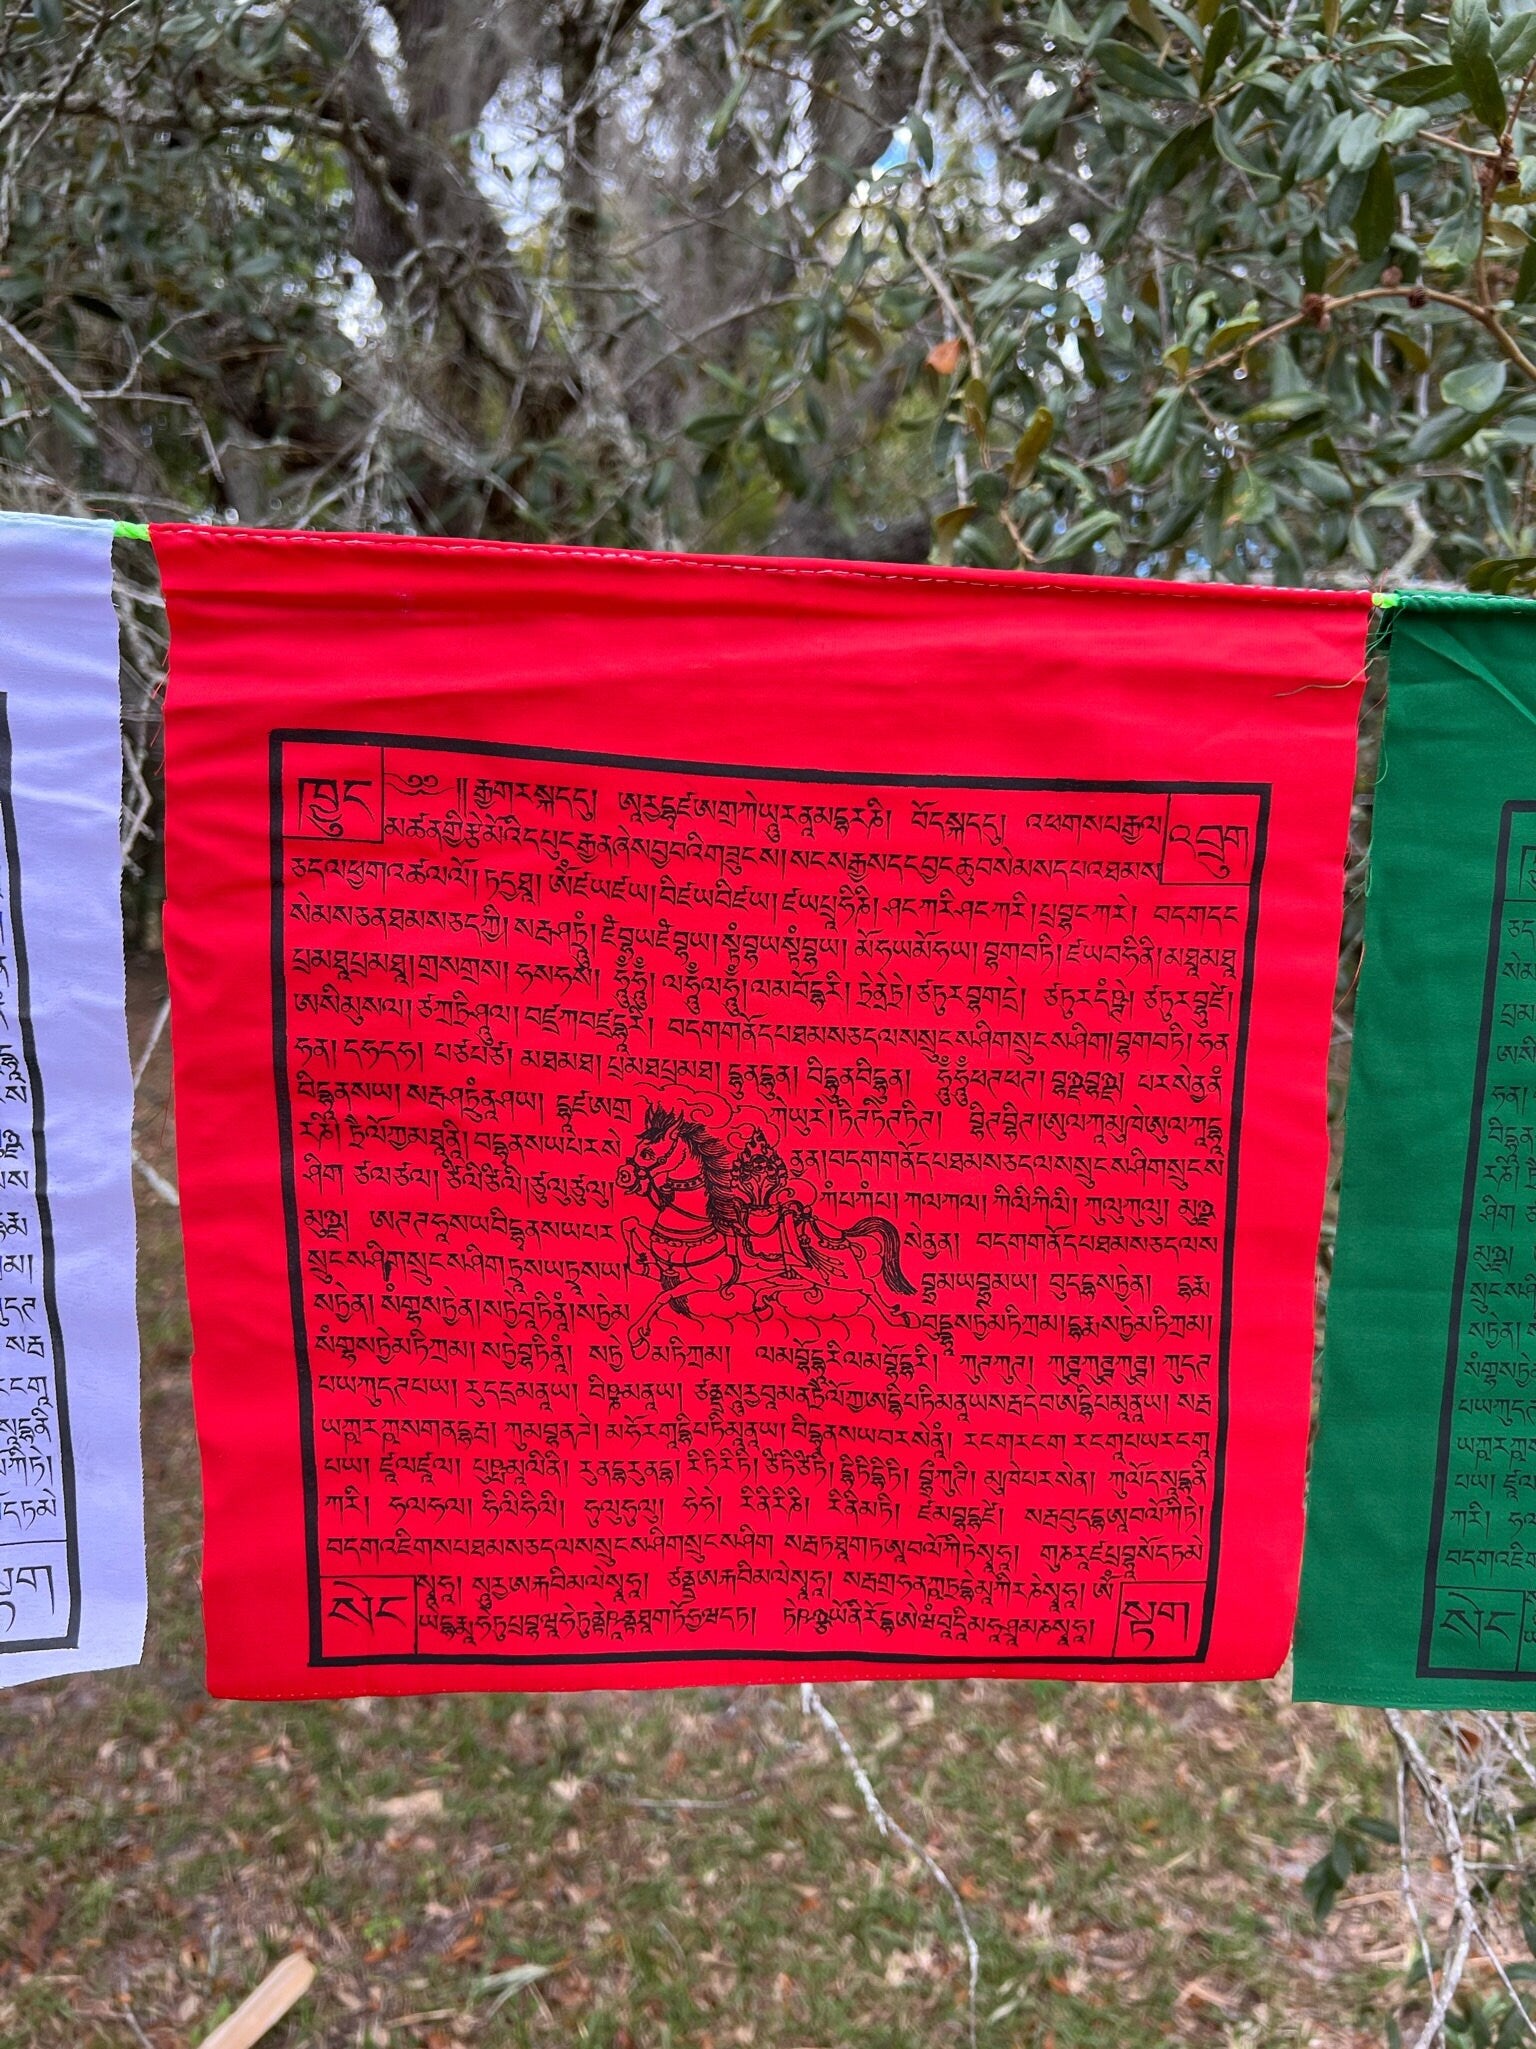 A single red flag from a Set of 25 Tibetan prayer flags with Gyaltsen Tsenmö prayers and windhorse designs on 13x13 inch flags in 5 colors. Believed to bring success to virtuous endeavors.